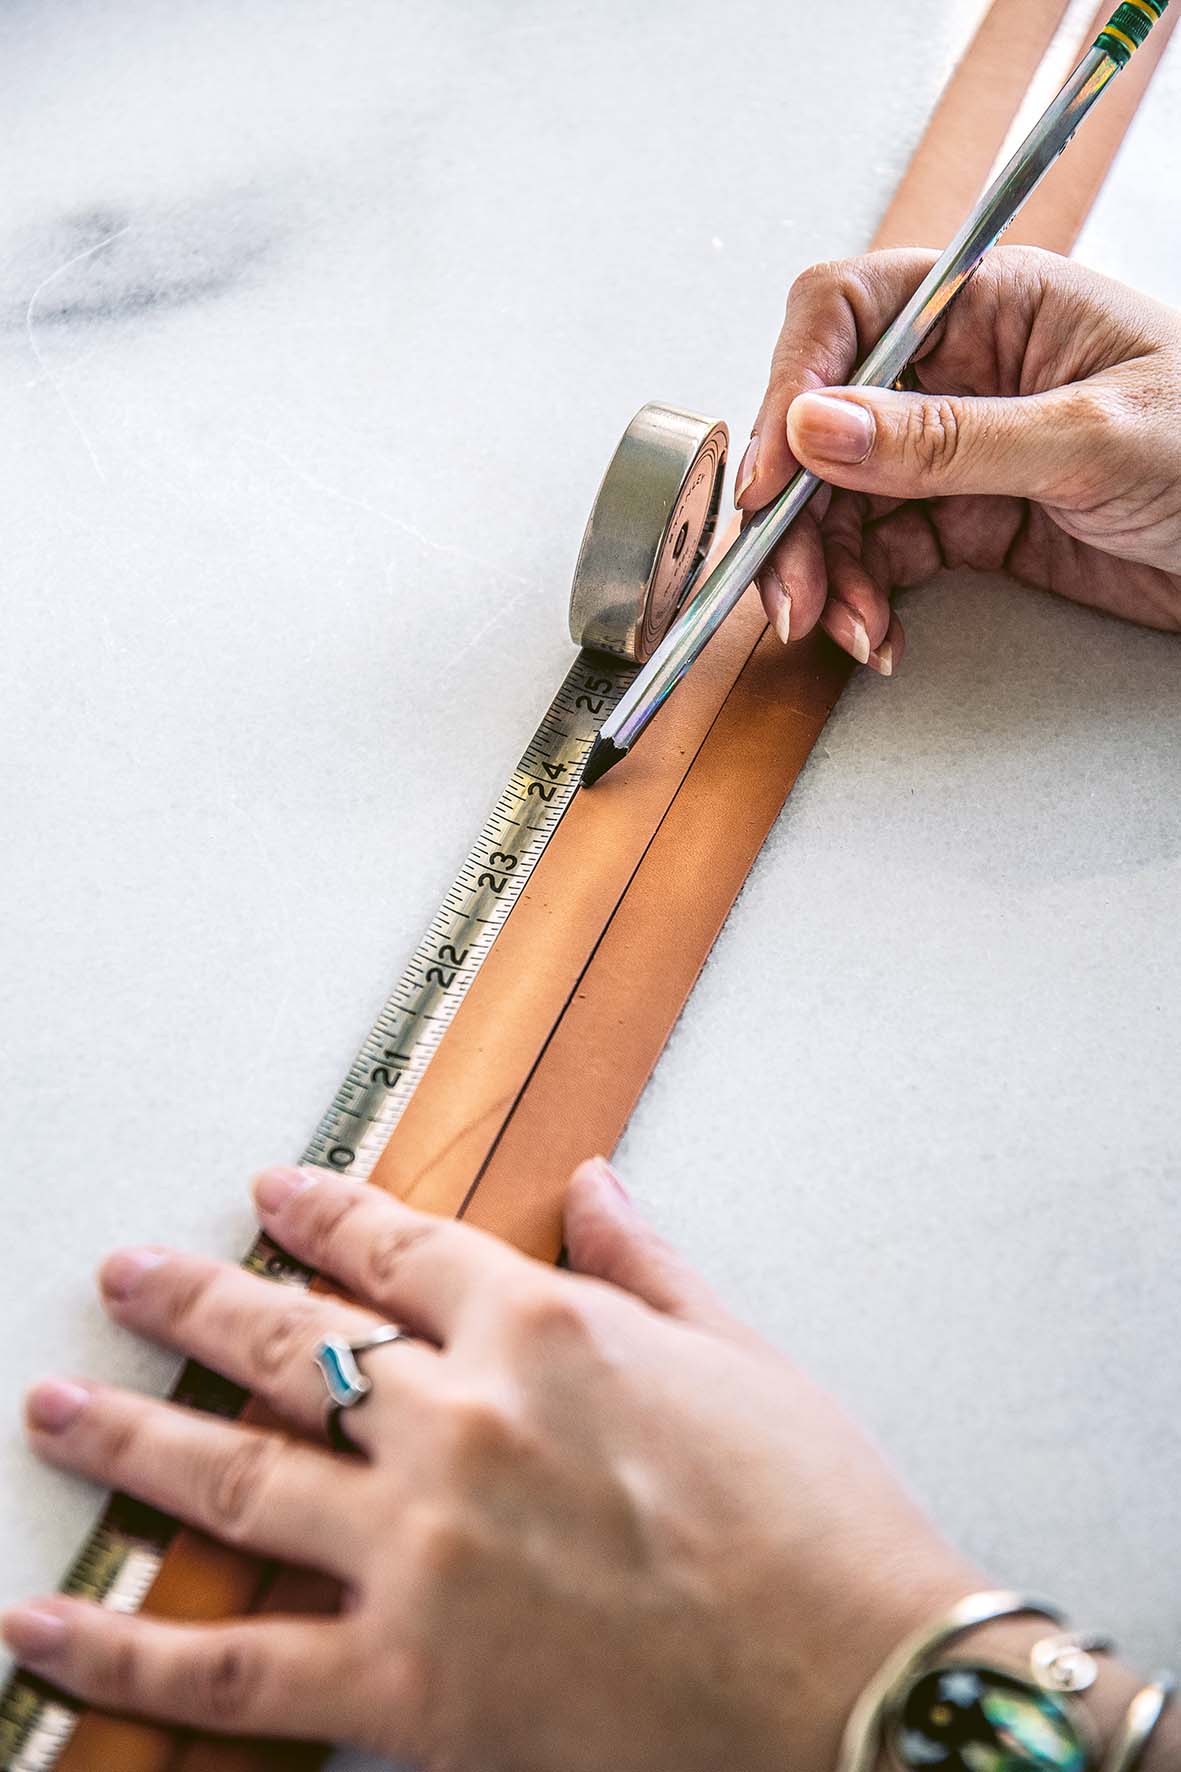 Measuring a line on leather straps with measuring tape